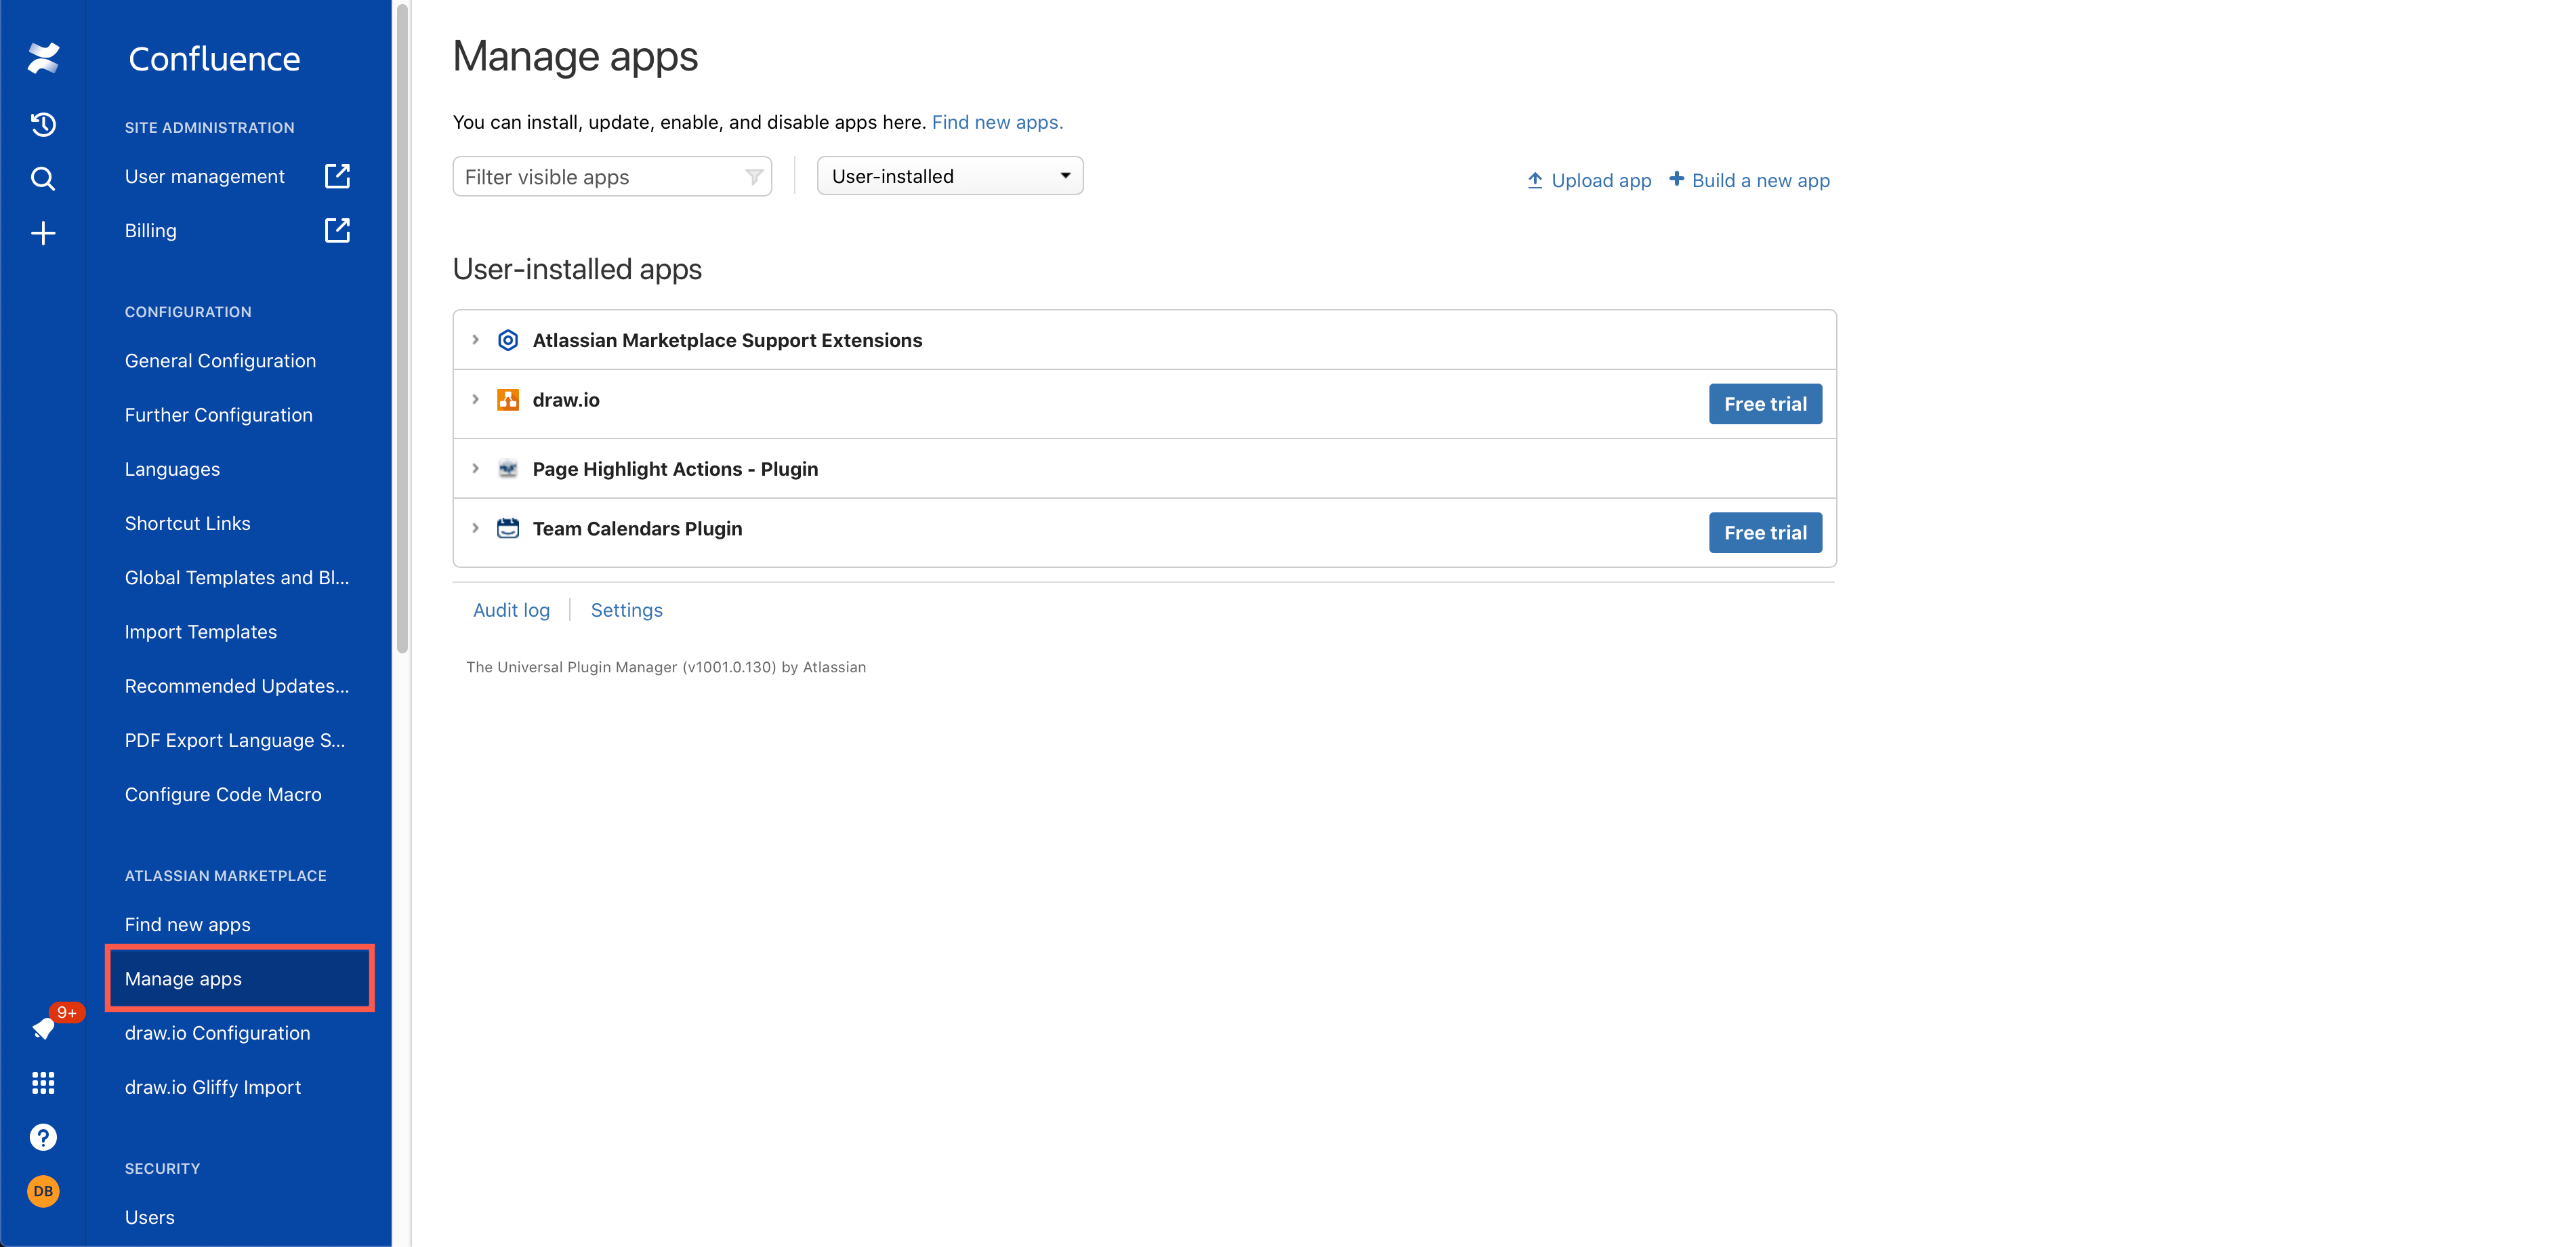 Manage the apps that are installed in your Confluence Cloud instance via Settings